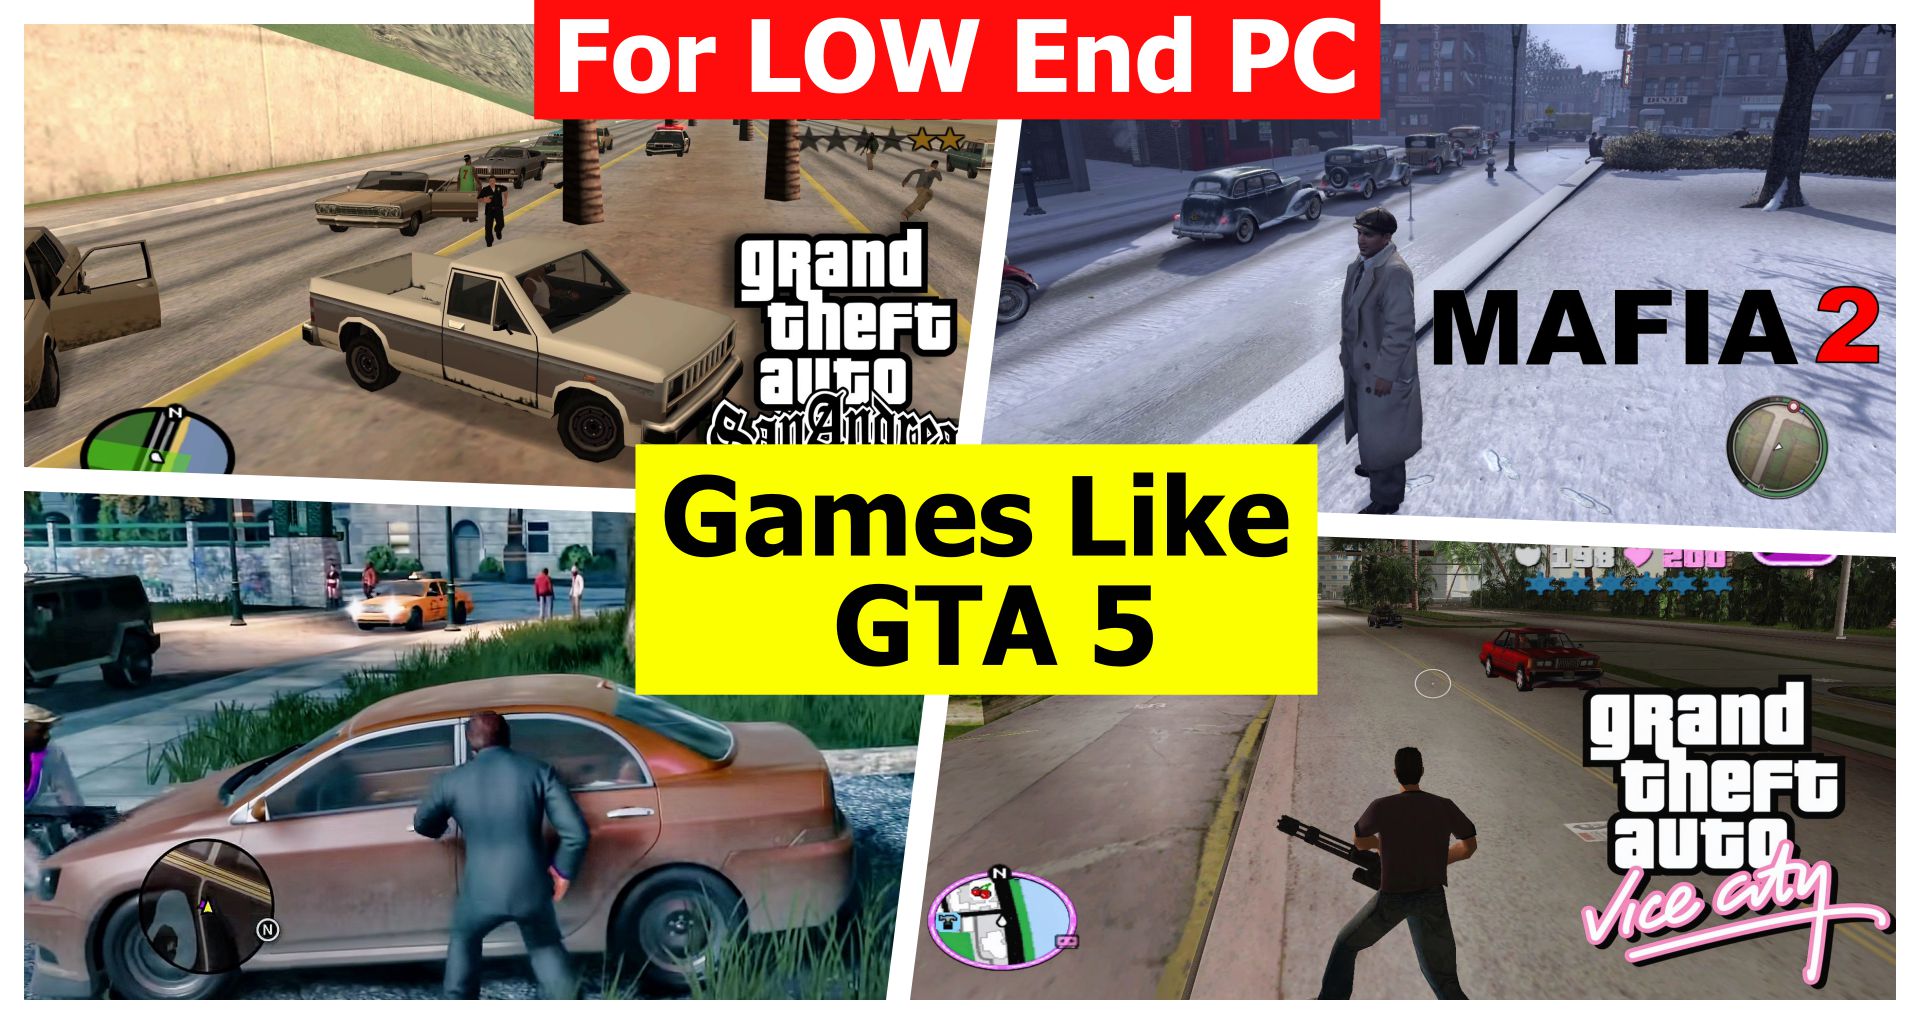 Games like GTA 5 for low-end PC